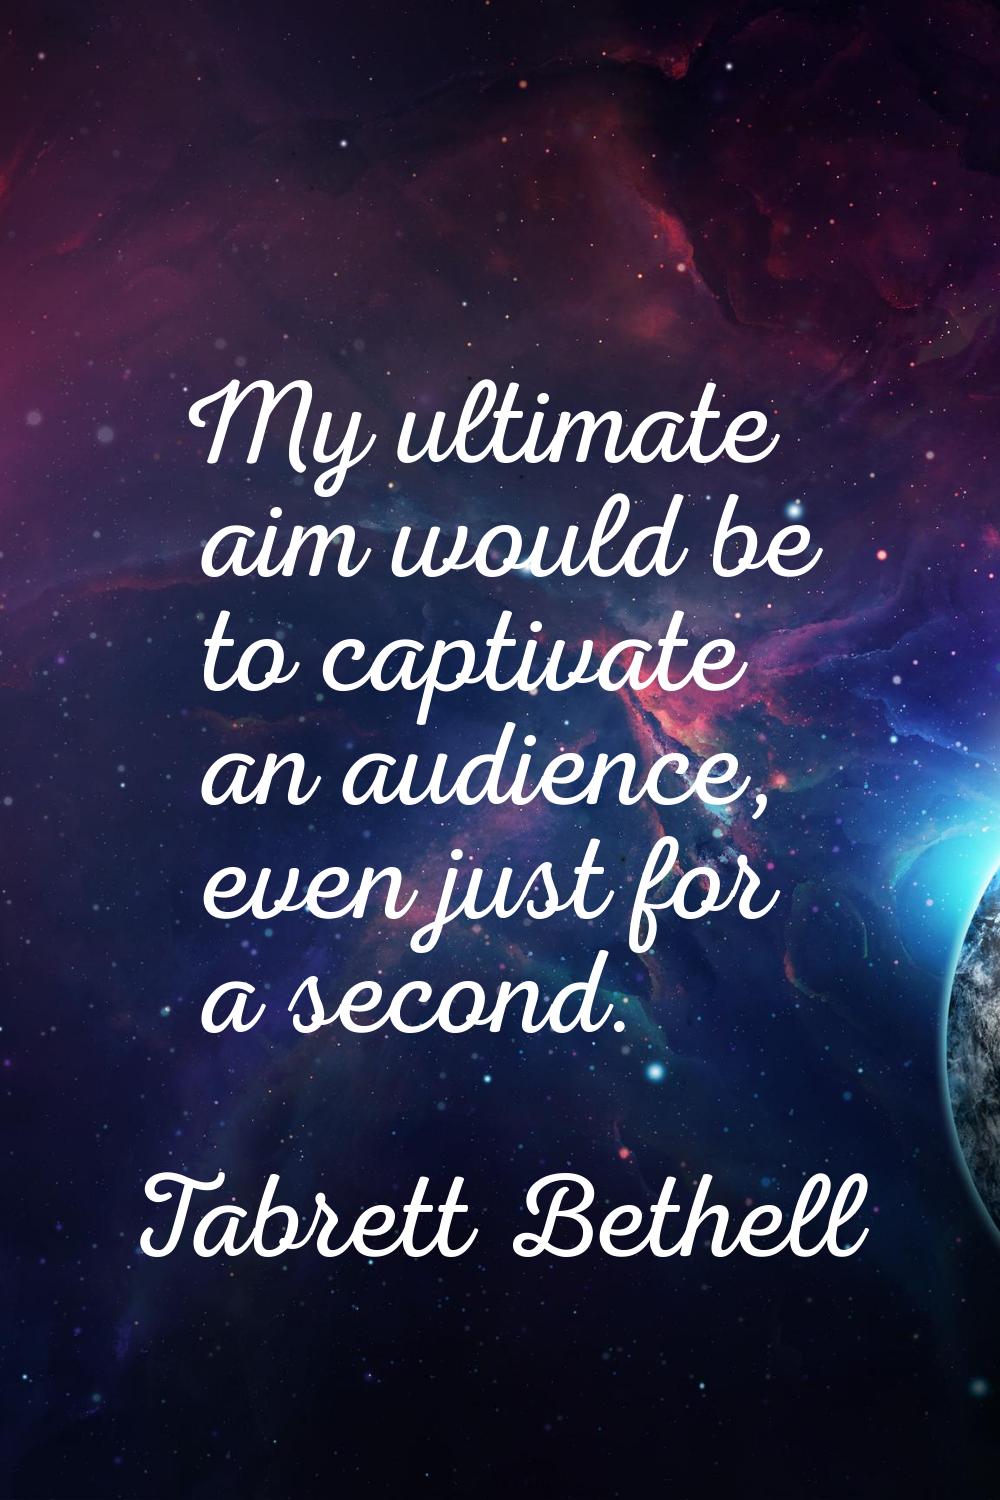 My ultimate aim would be to captivate an audience, even just for a second.